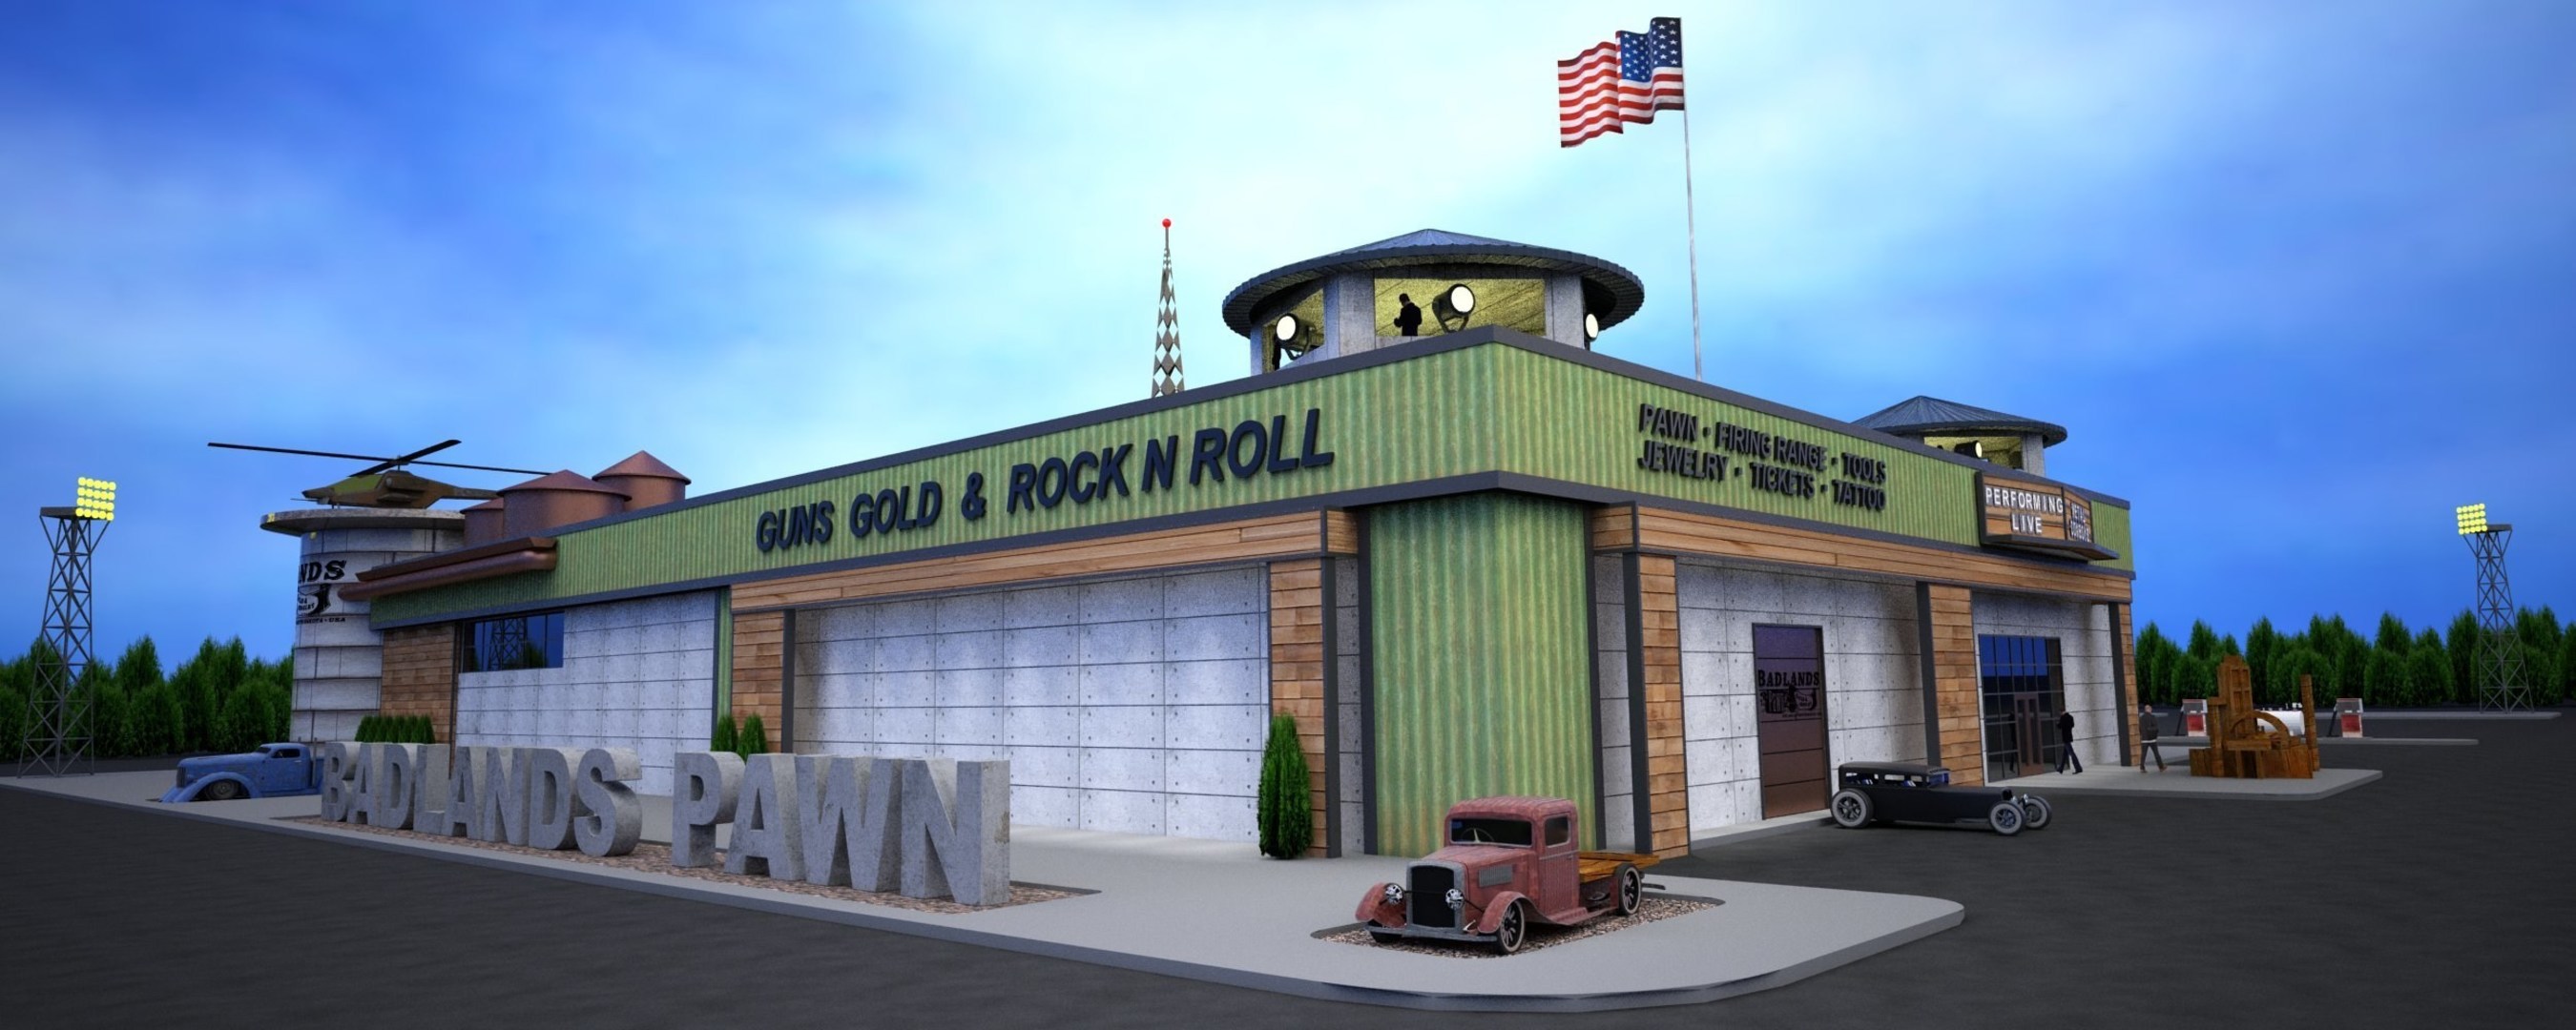 Pictured is Brass Junkie Co.'s rendering of Badlands Pawn, Gold and Jewelry, scheduled to open in Sioux Falls, South Dakota on Thanksgiving Day.